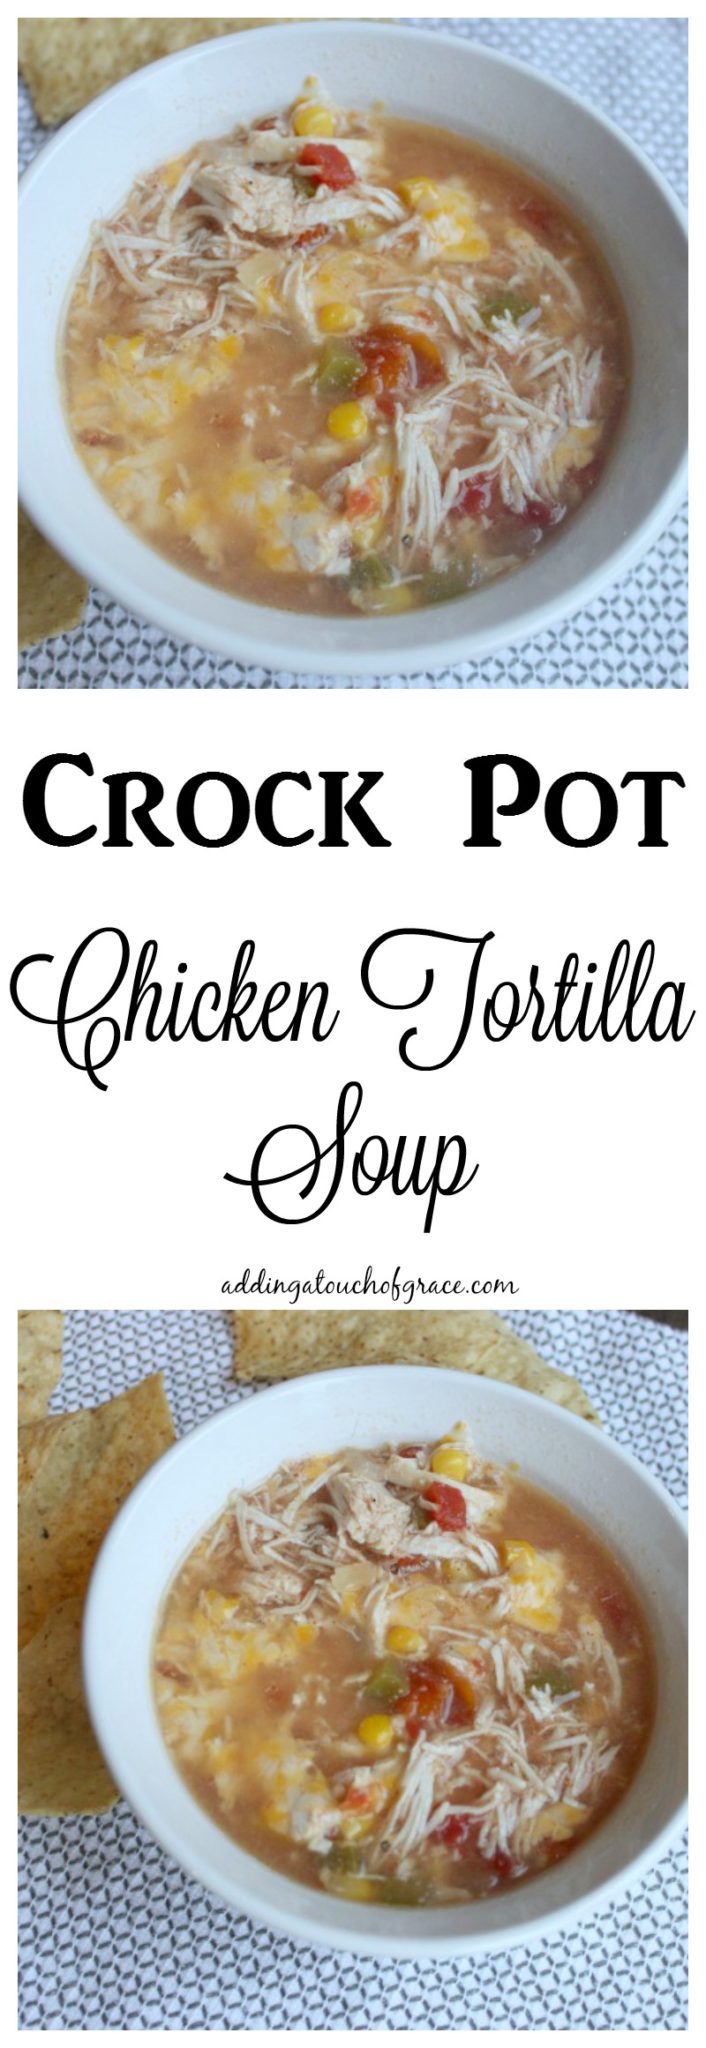 This chicken tortilla soup recipe is so simple and delicious. Made in the Crock Pot, it's bursting with flavor and perfect for these cool fall evenings.